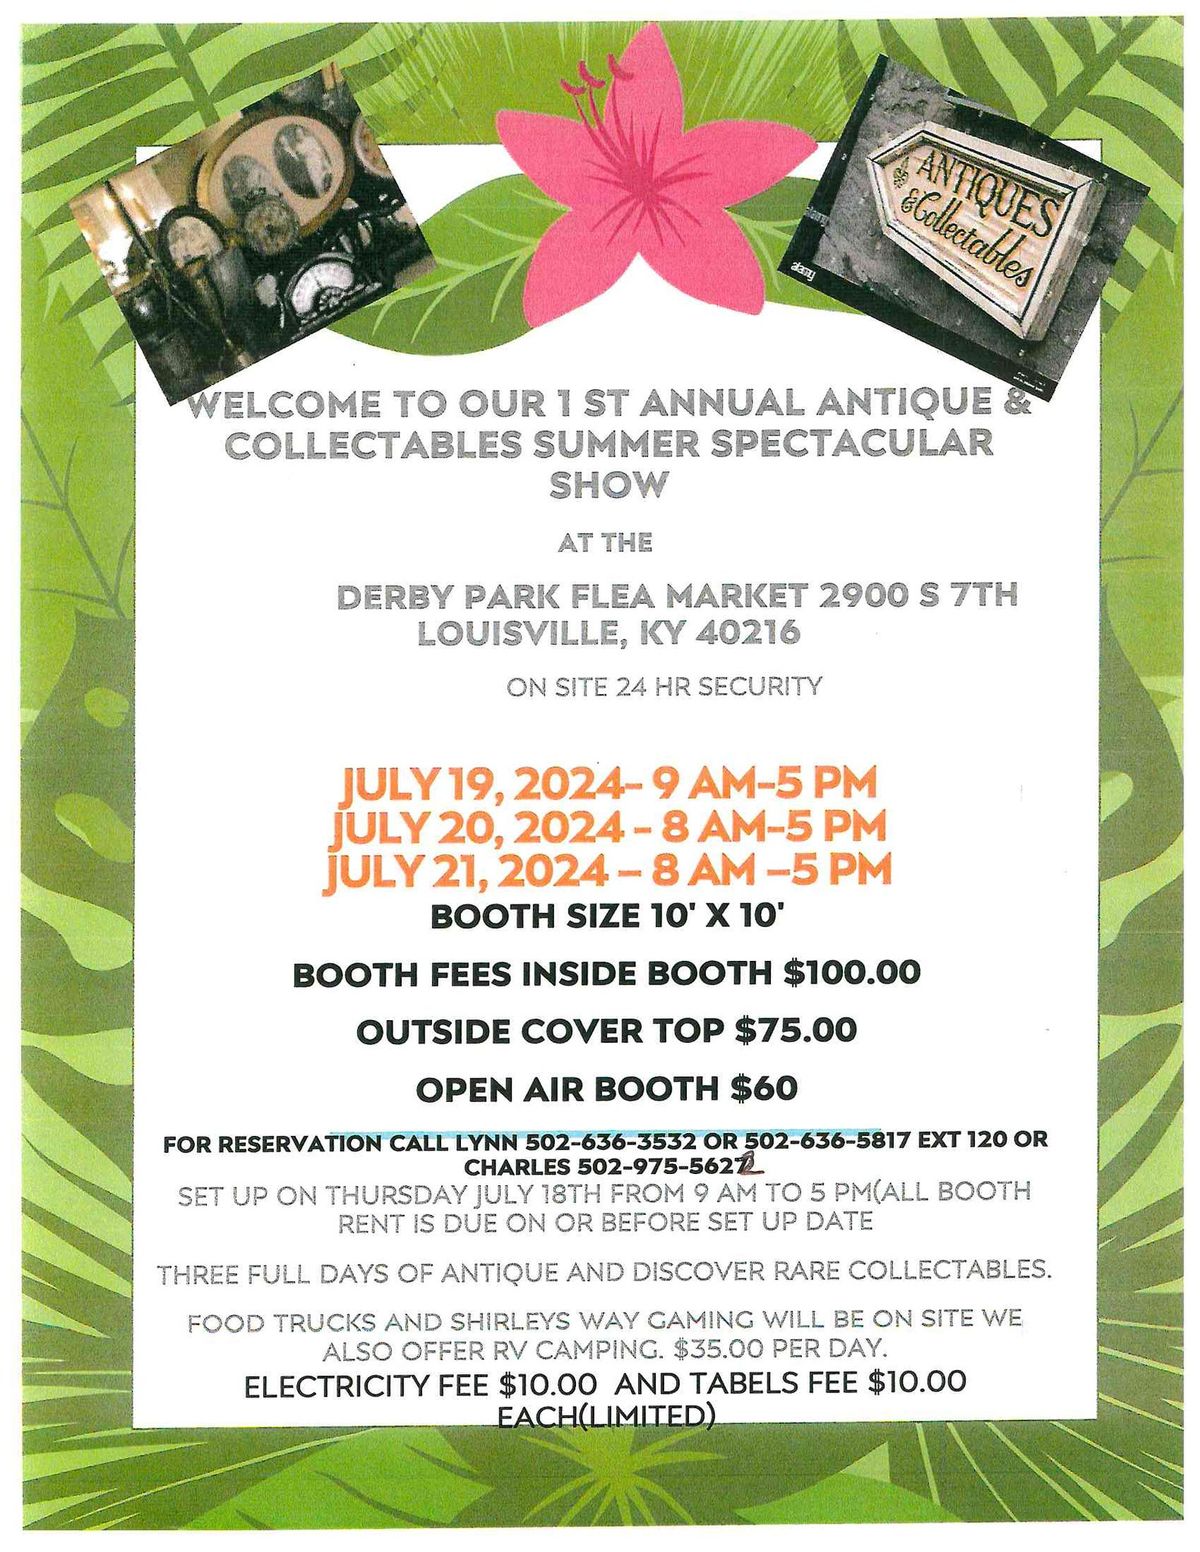 DERBY PARK 1 ST ANNUAL ANTTIQUE AND COLLECTABLE SUMMER SPECTACULAR